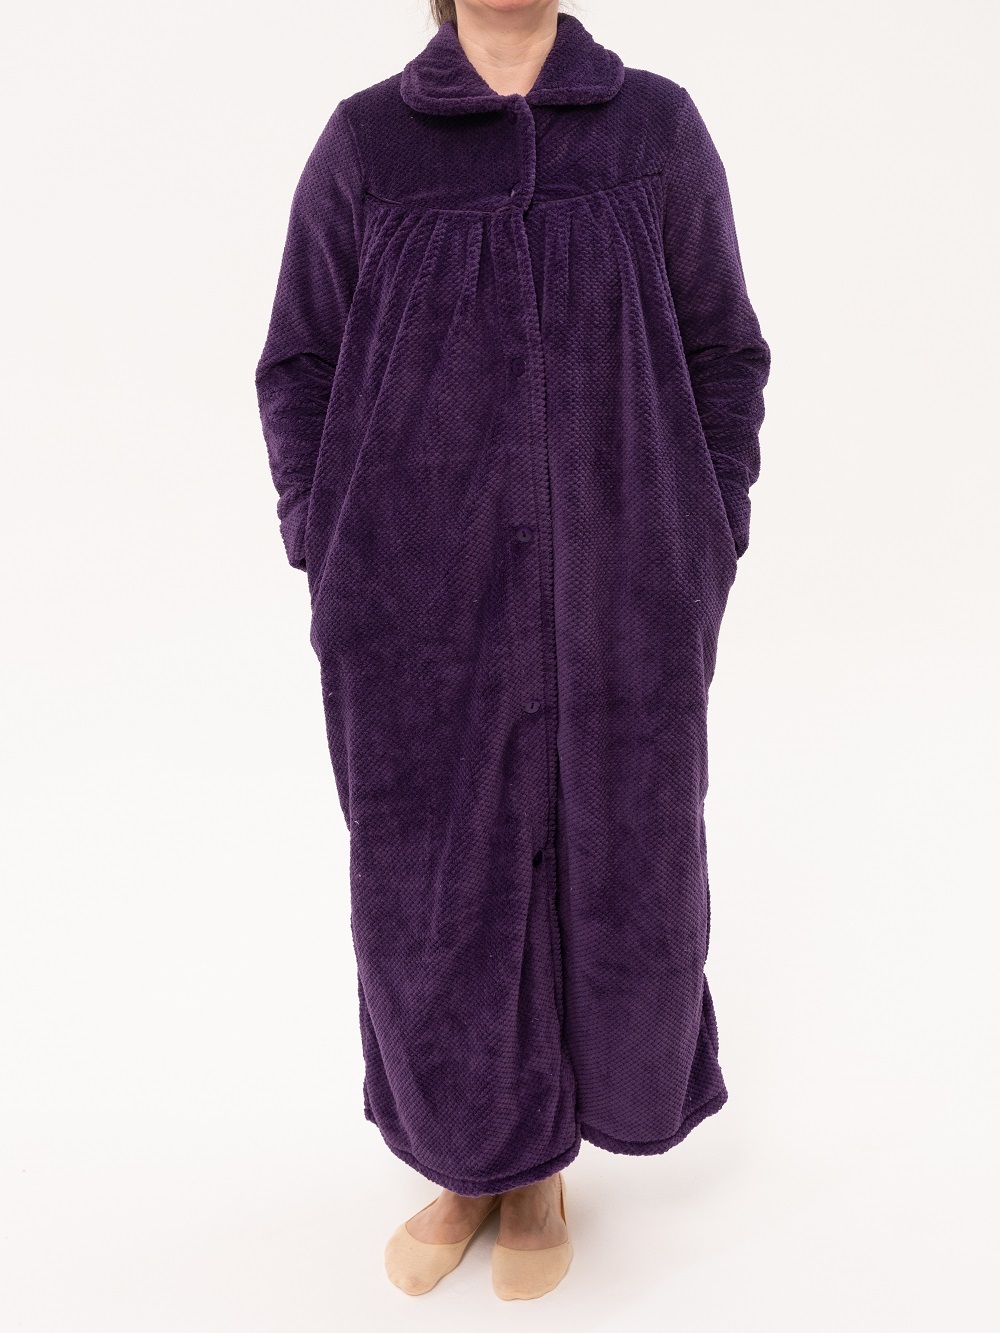 Hooded Deluxe Plush Spa Robe | Luxury Spa Robes | Luxury Spa Robes